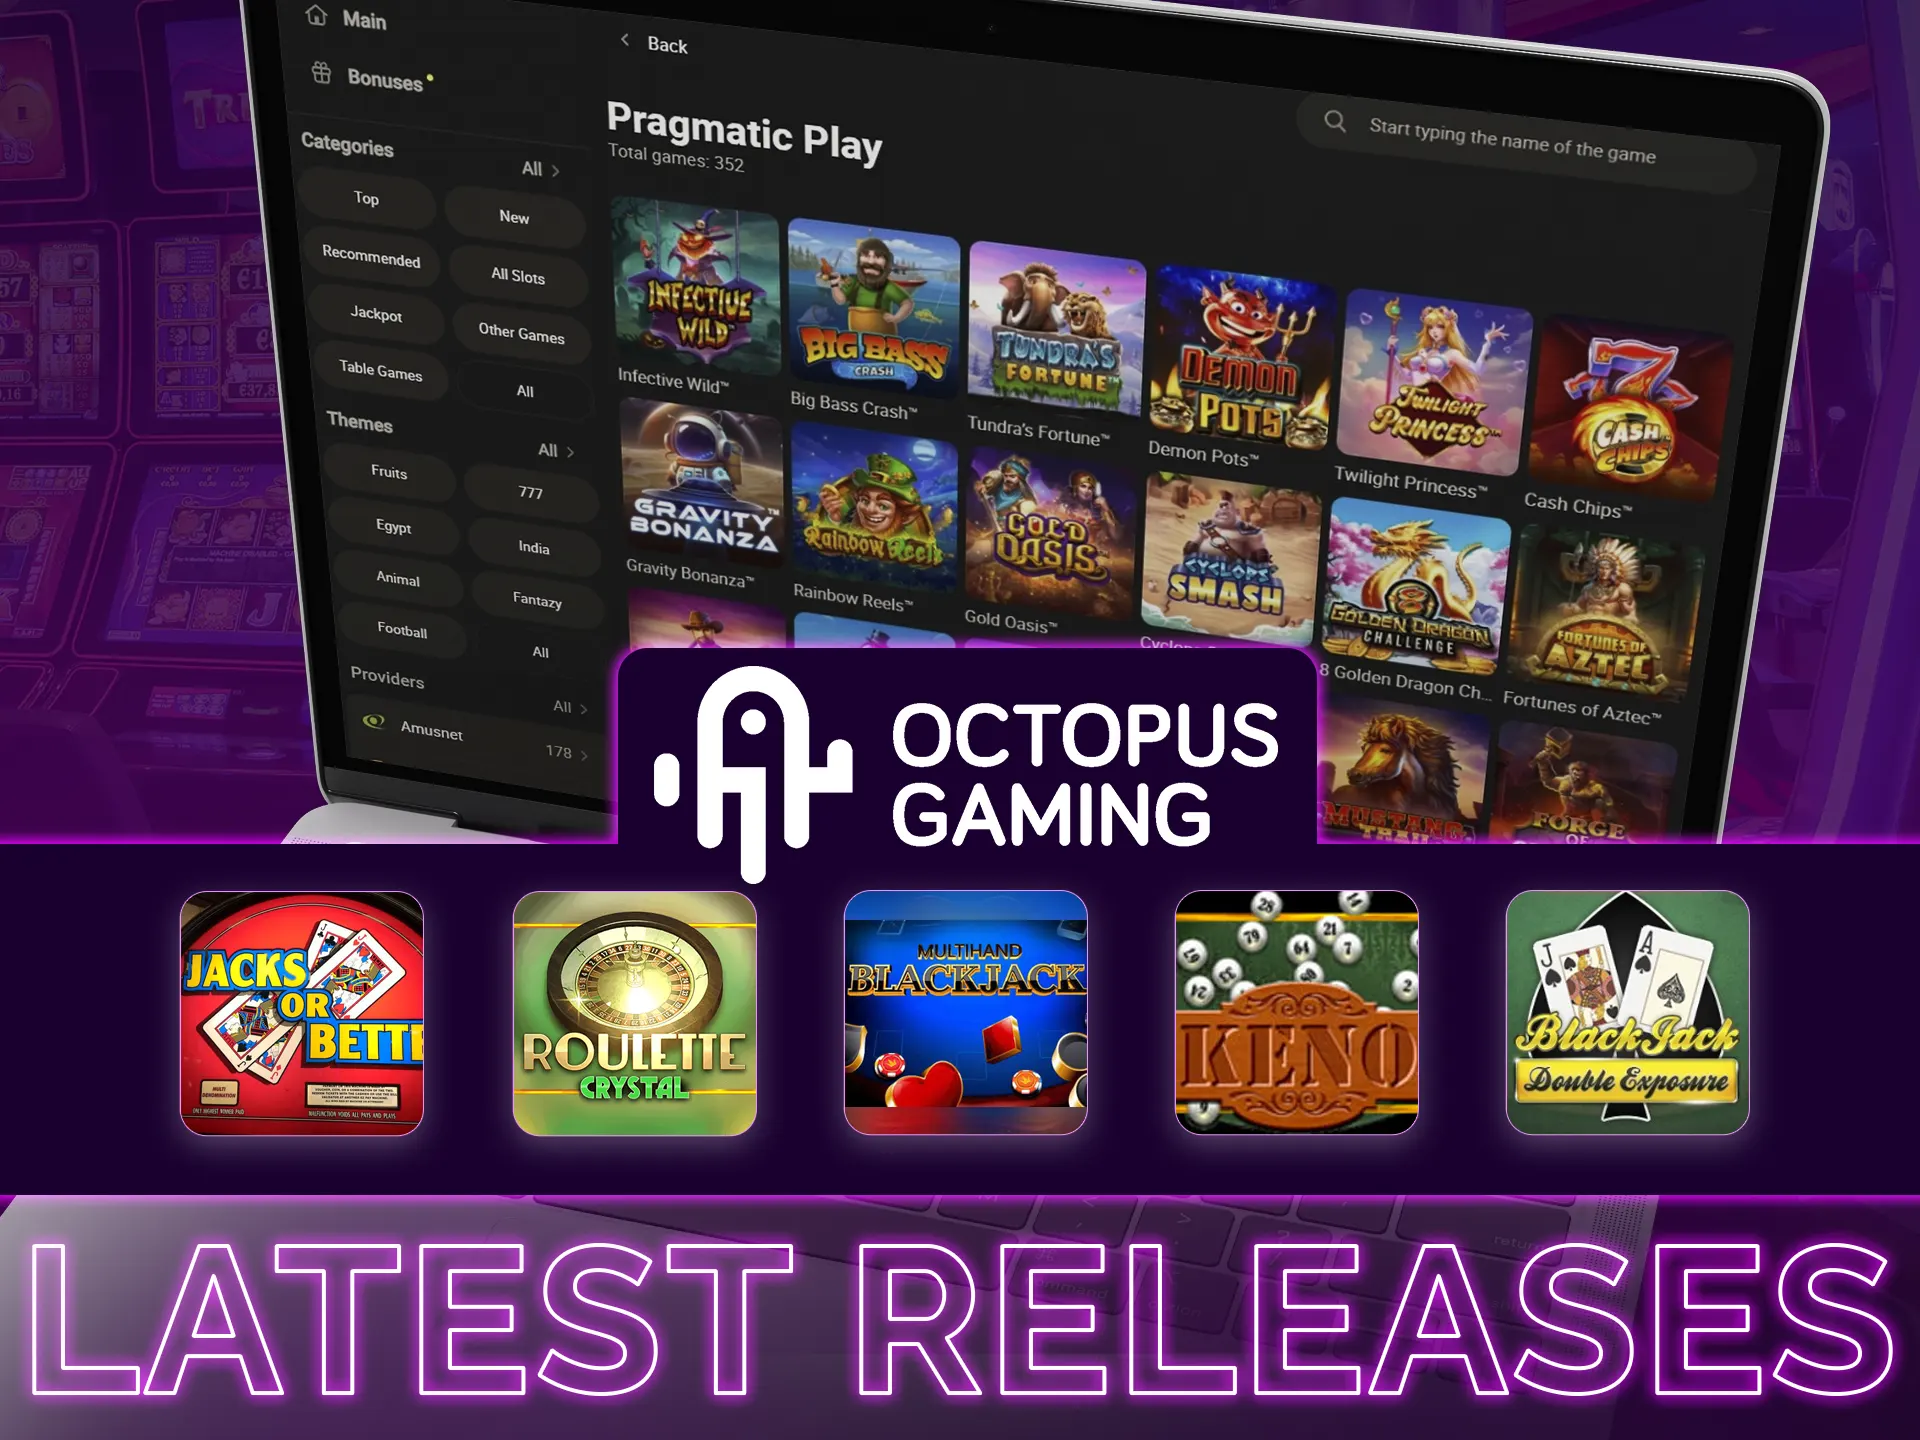 Learn more about latest releases from Octopus Gaming Provider.